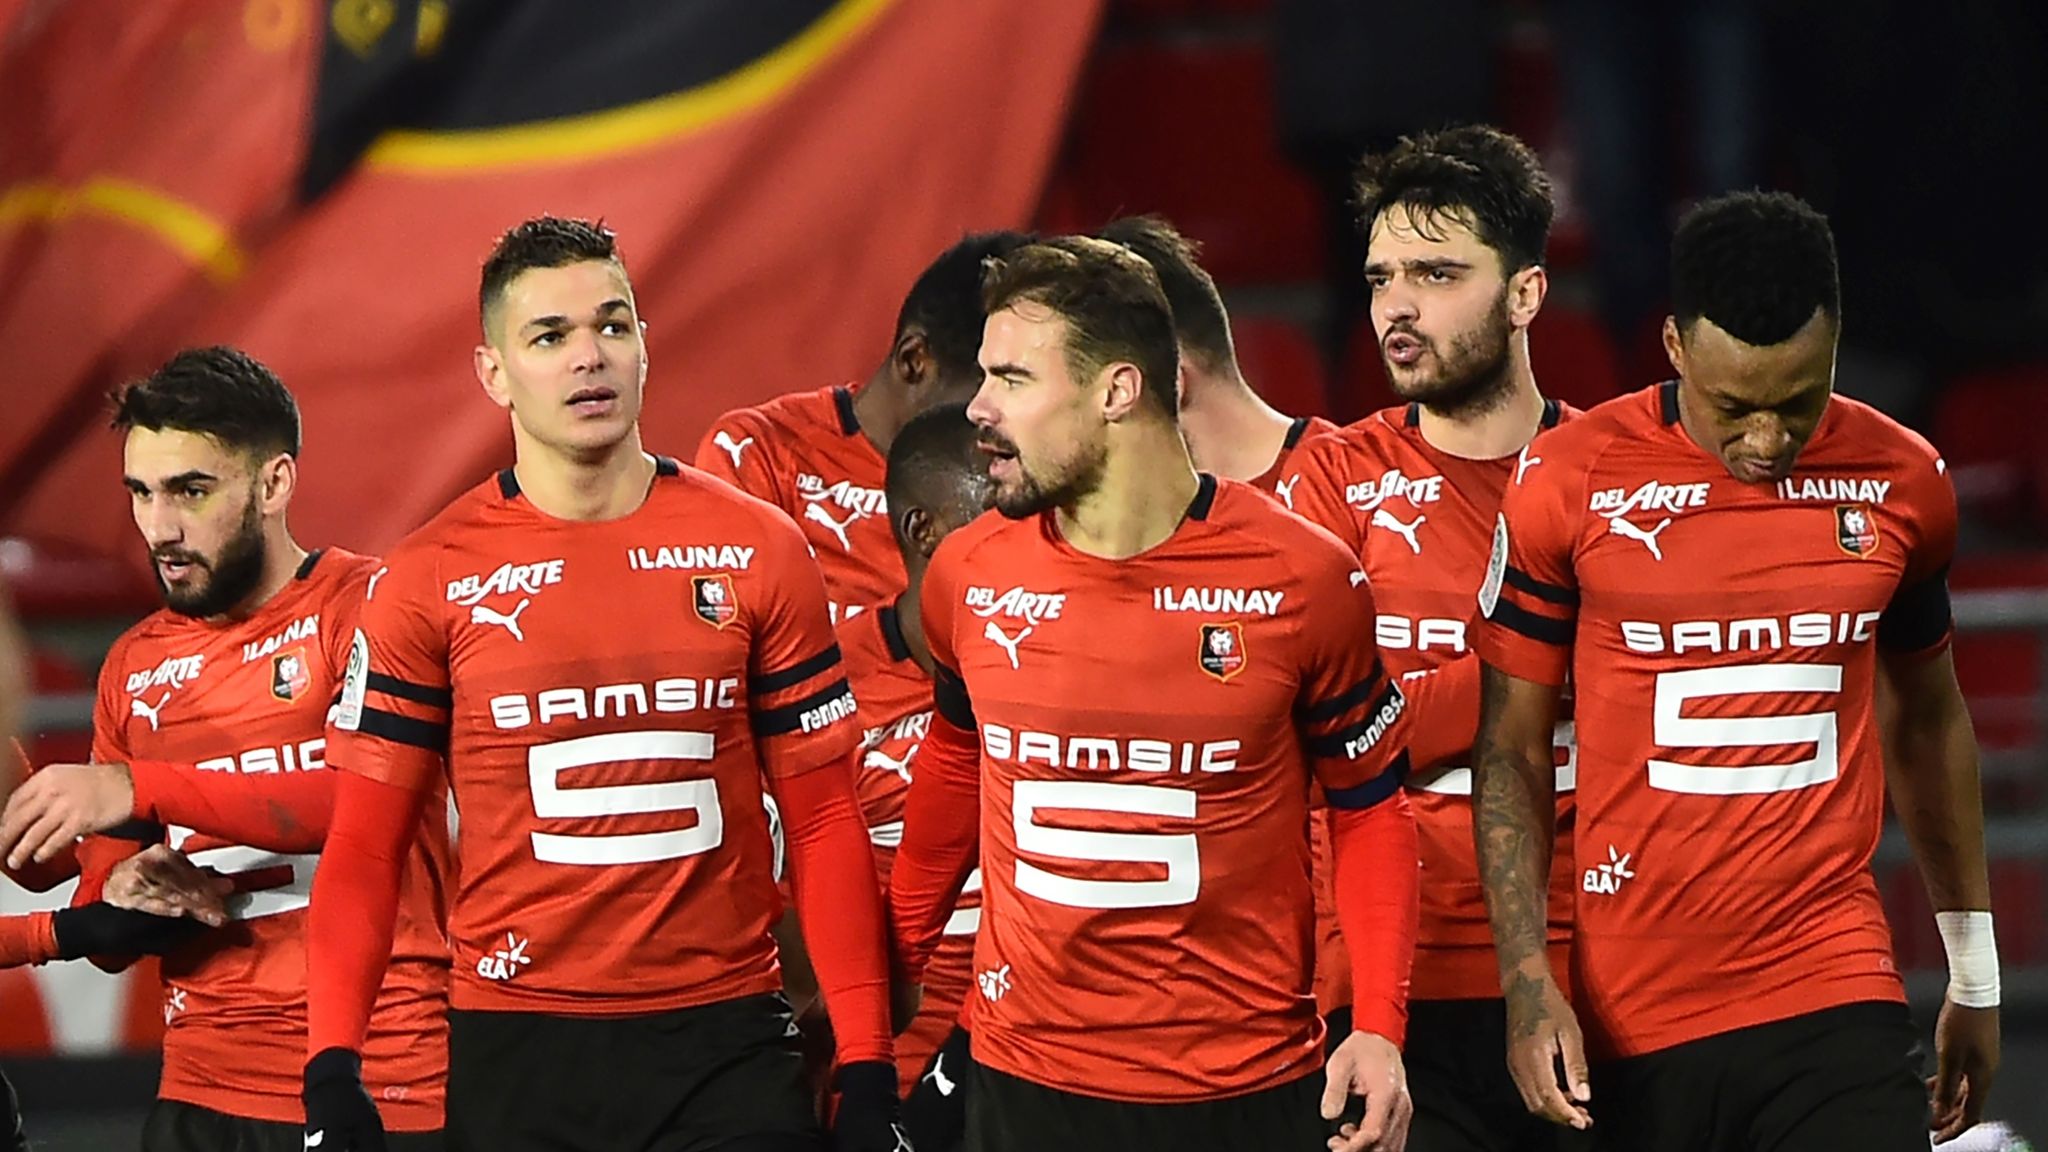 soi-keo-rennes-vs-montpellier-luc-22h-ngay-29-8-2020-1